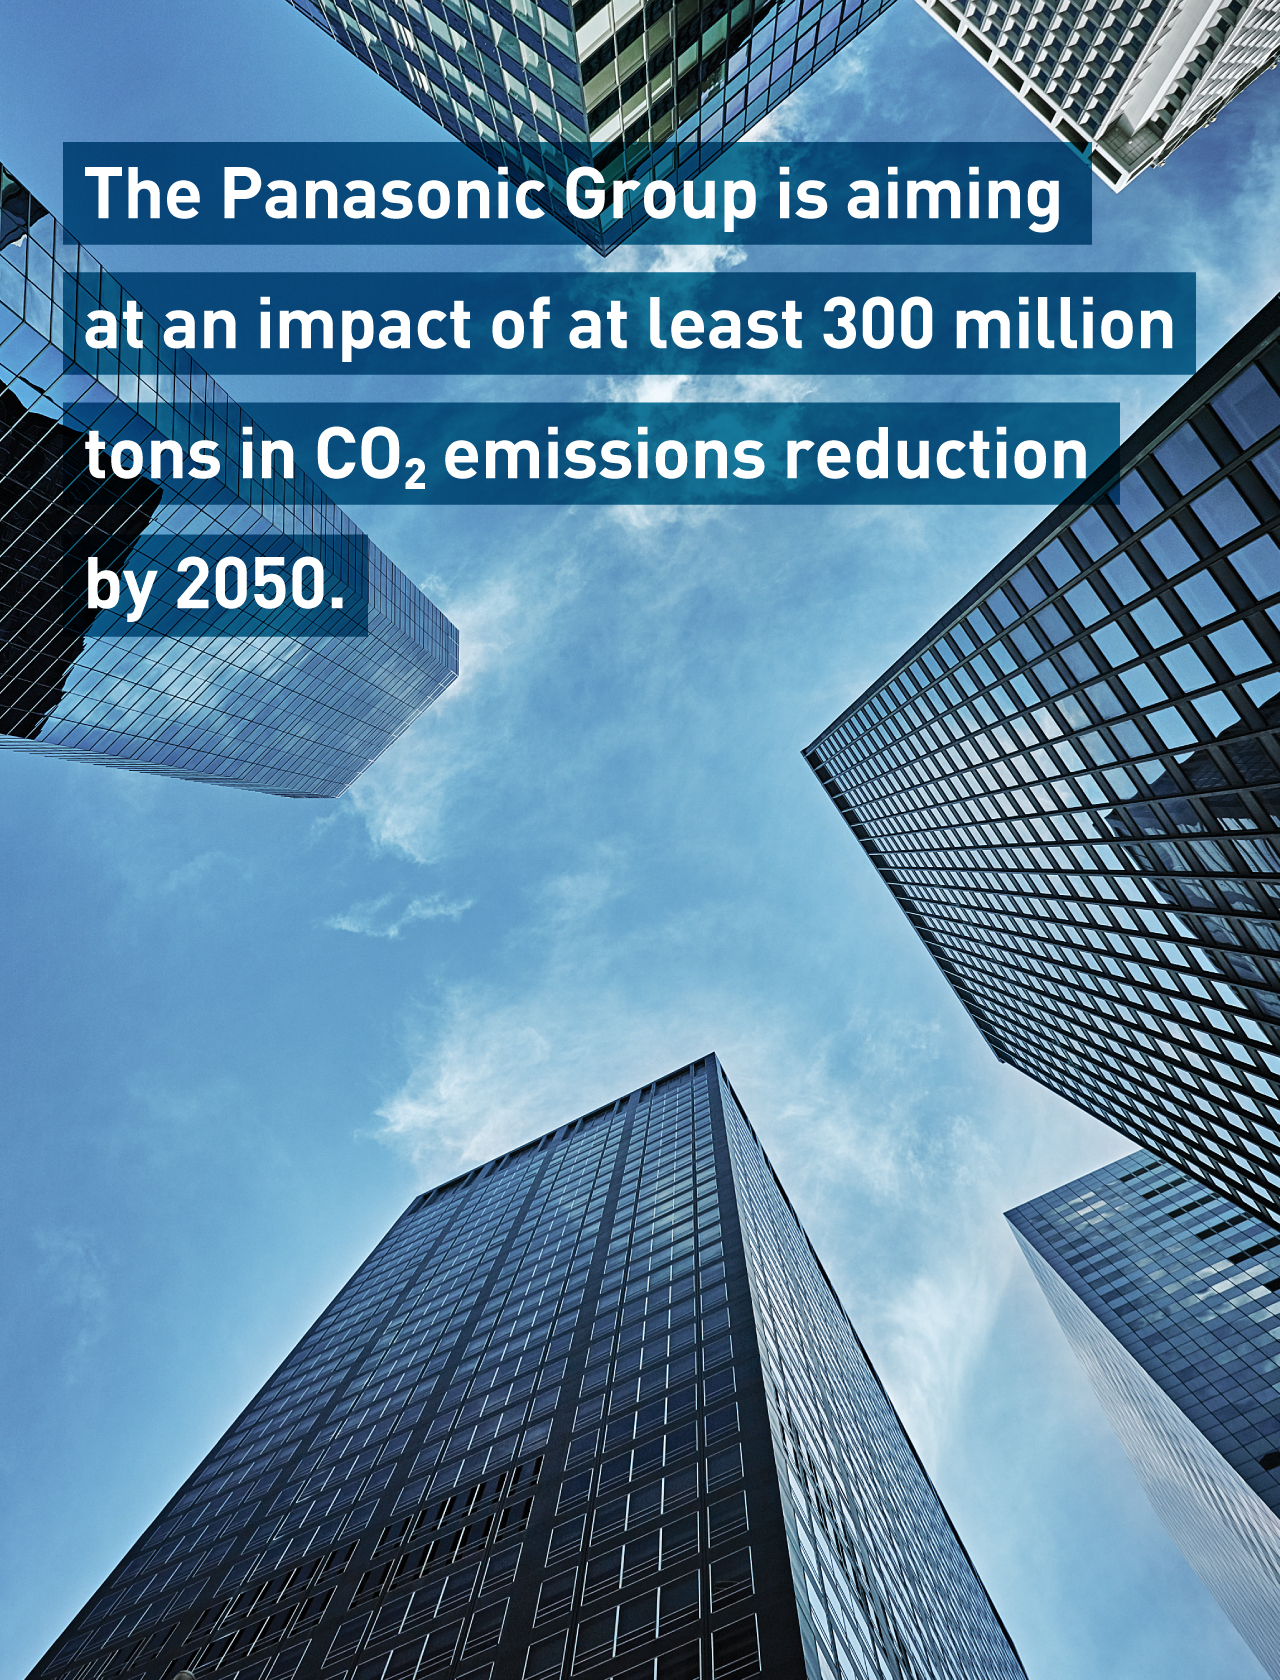 The Panasonic Group is aiming at an impact of at least 300 million tons in CO2 emissions reduction by 2050. Background photo: Tall skyscrapers viewed from below against a blue sky.